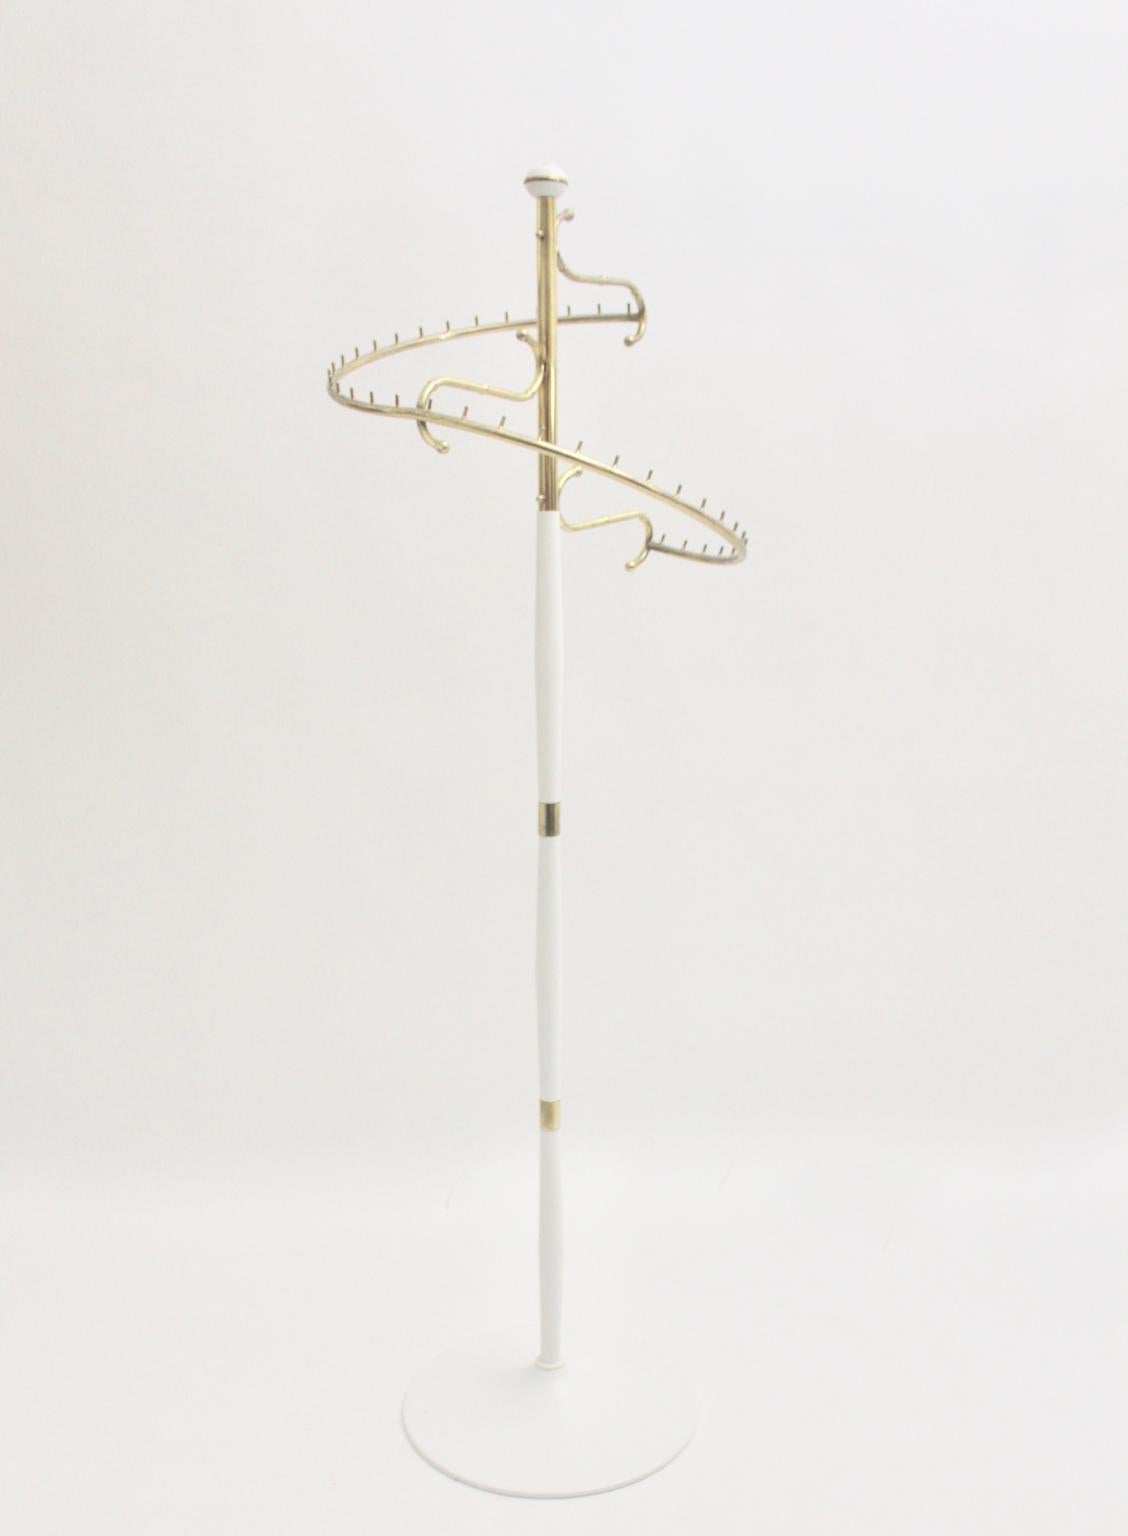 White and Brass Vintage Mid-Century Modern Rack Maison Bagues, 1950s, France For Sale 1